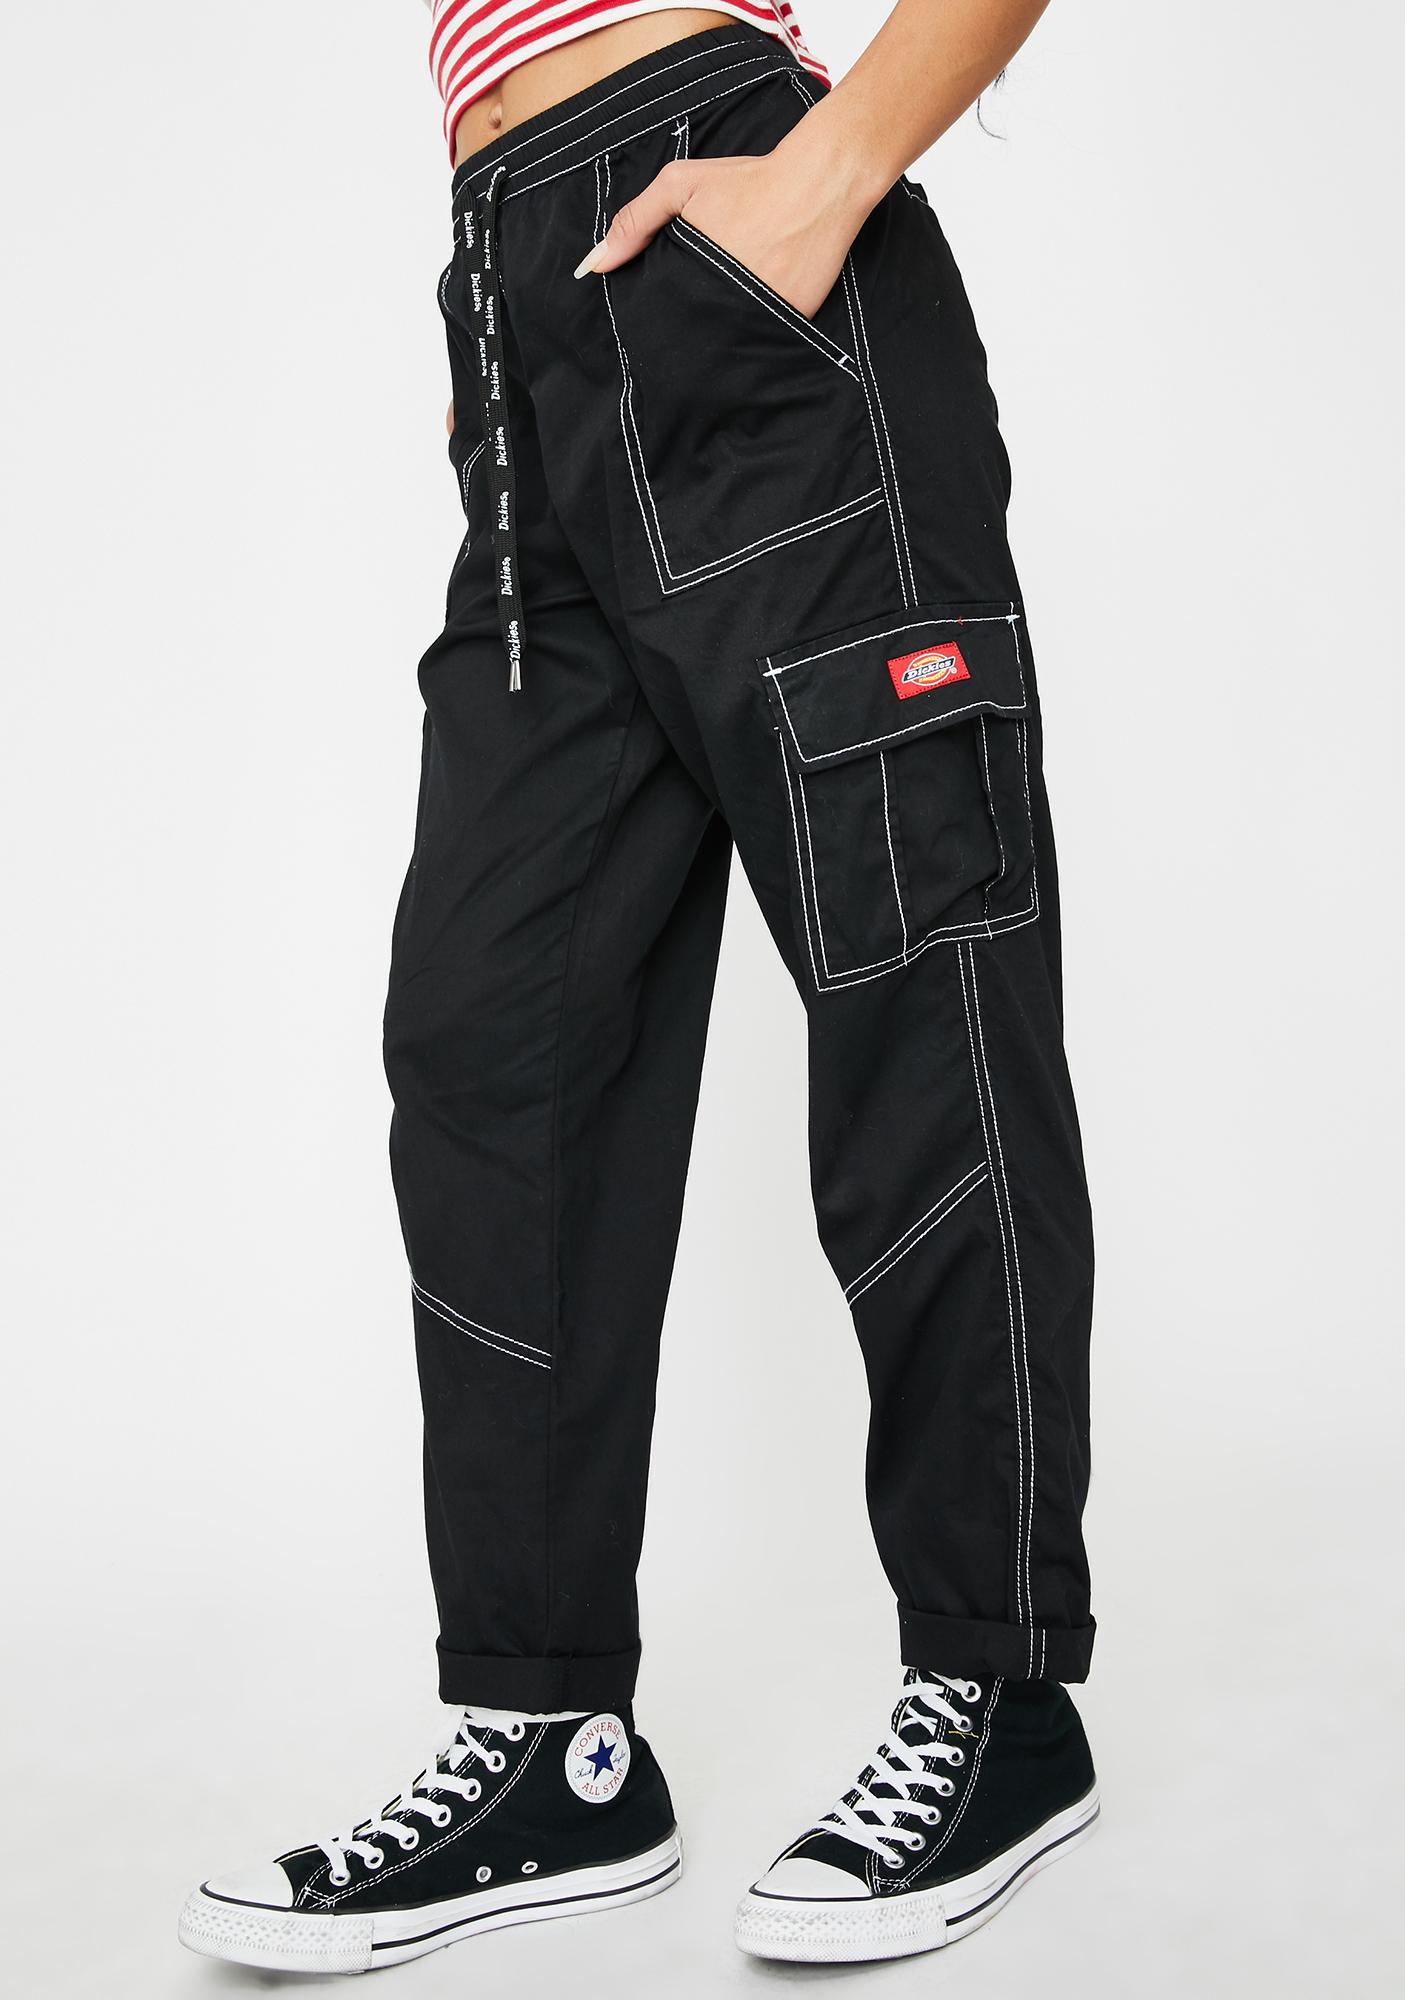 cropped cargo pants